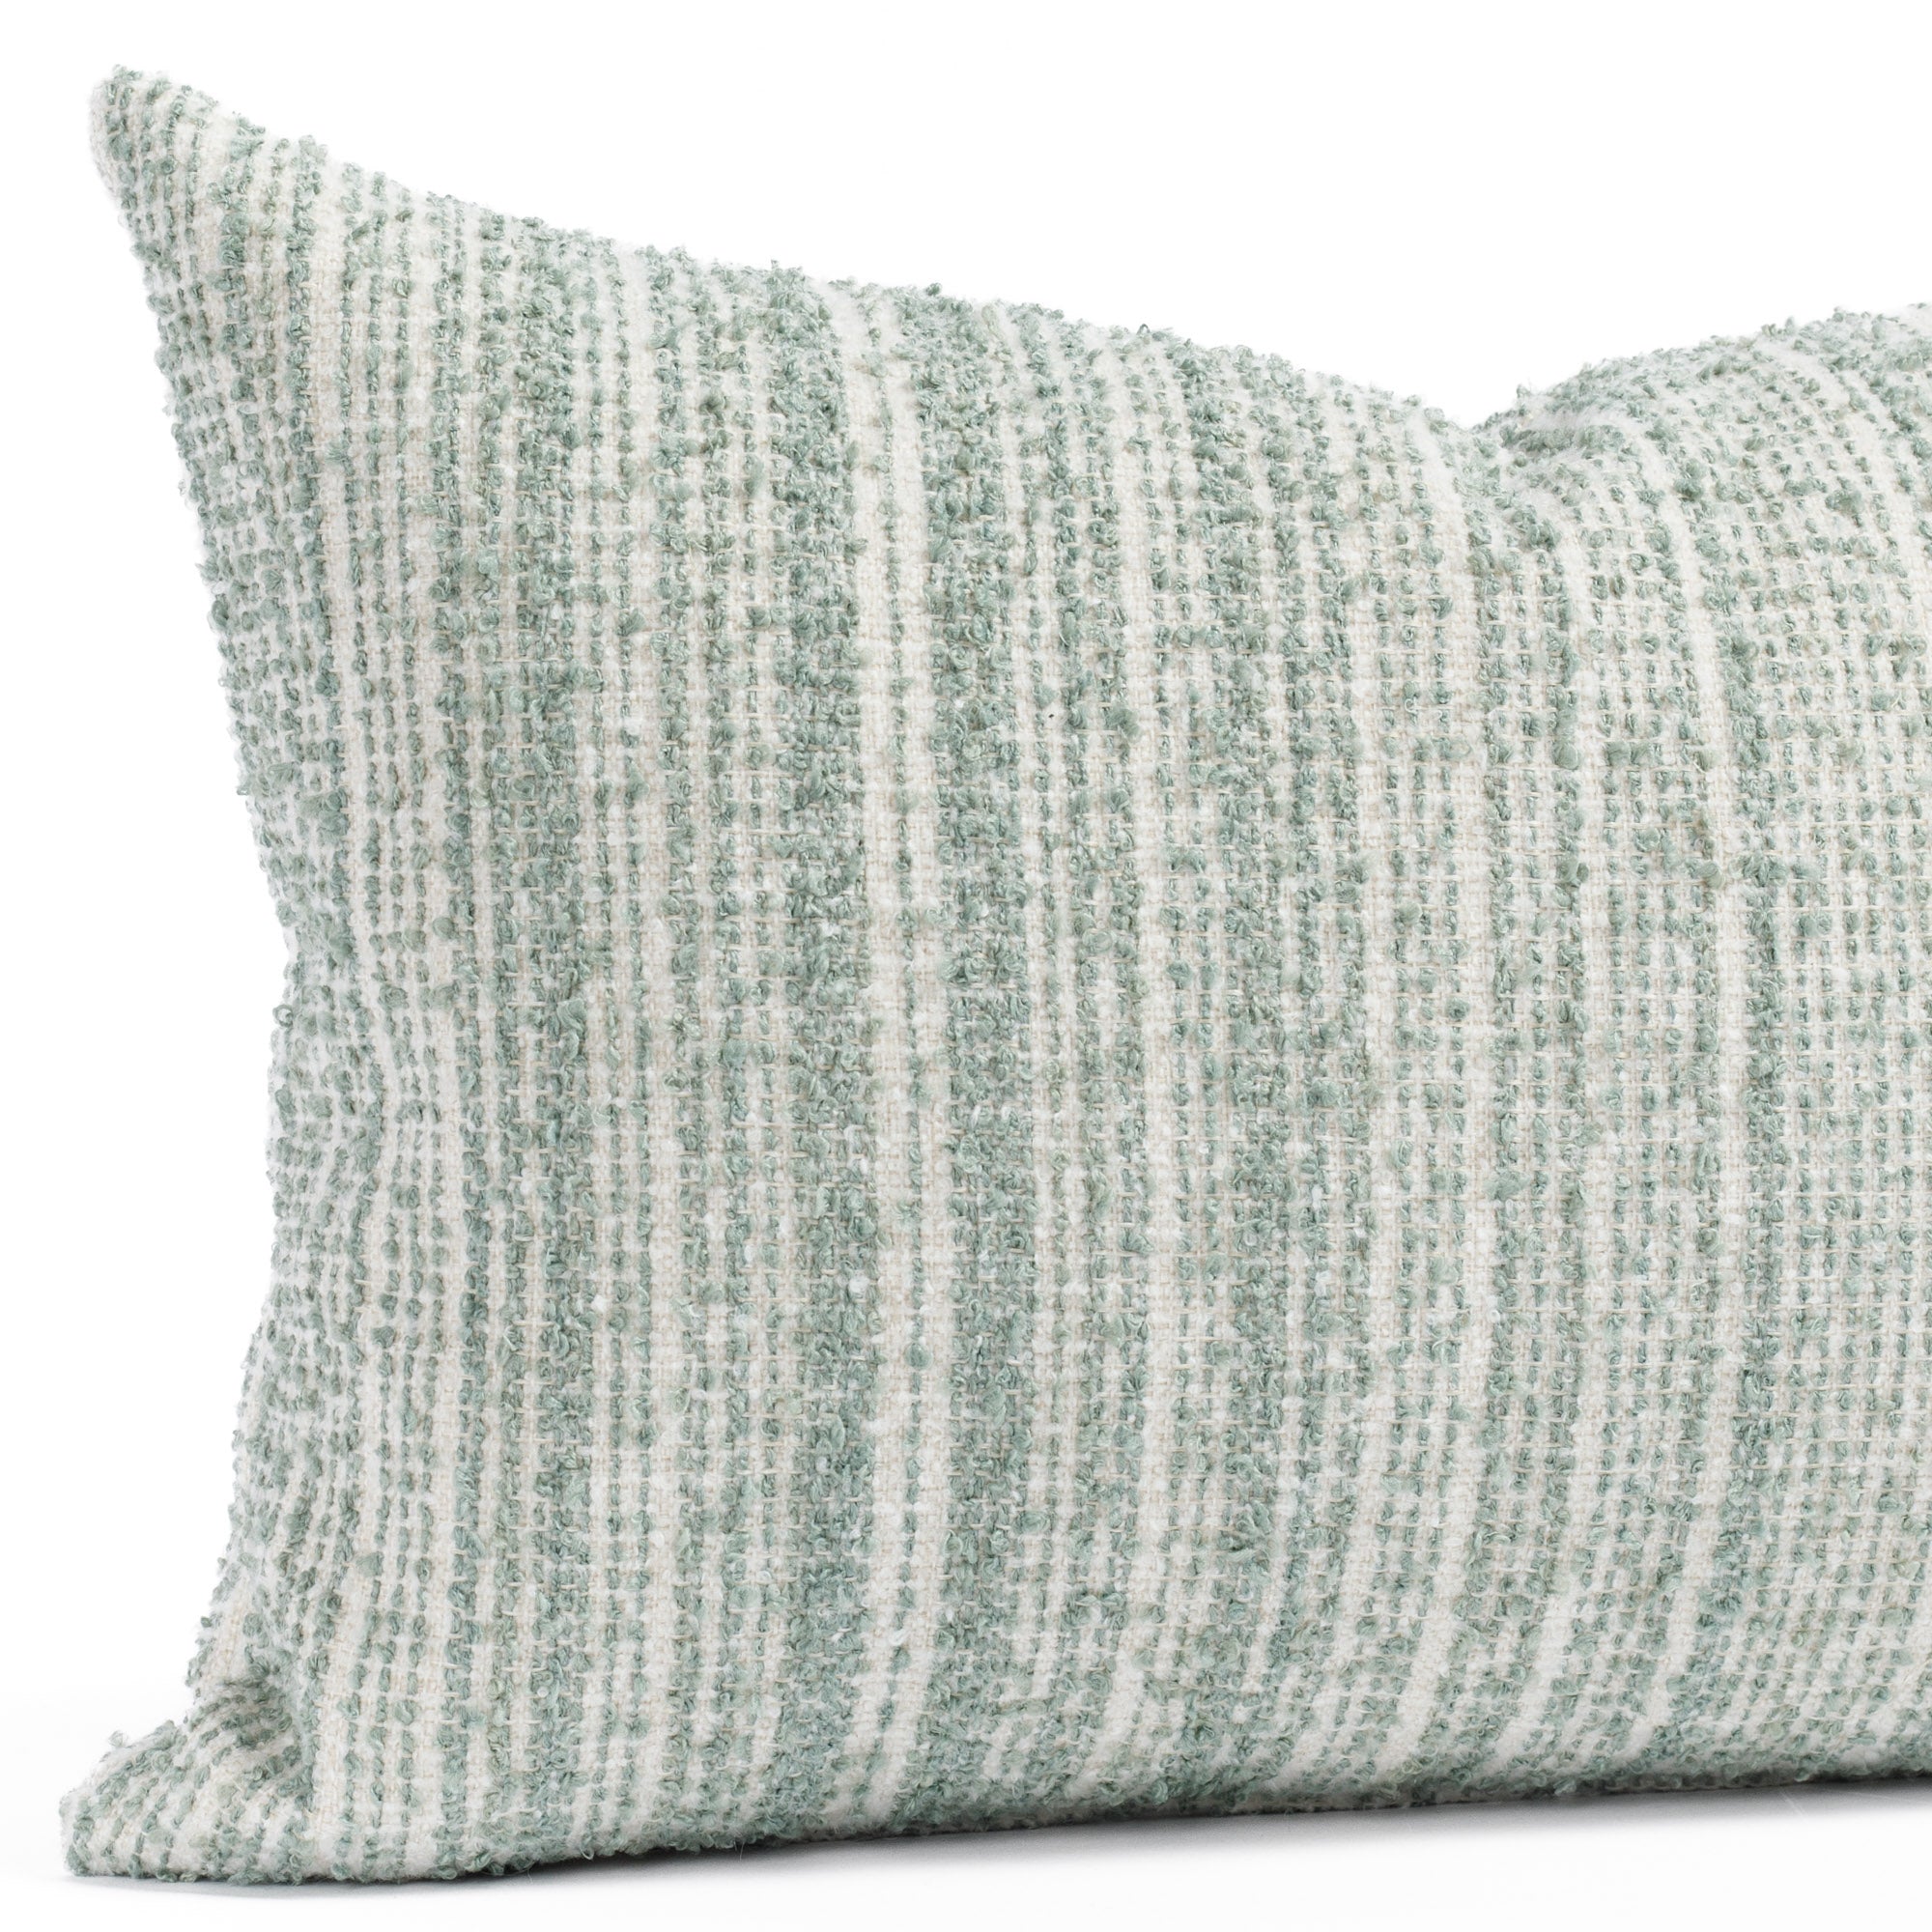 a soft white and blue green boucle striped lumbar pillow : close up view